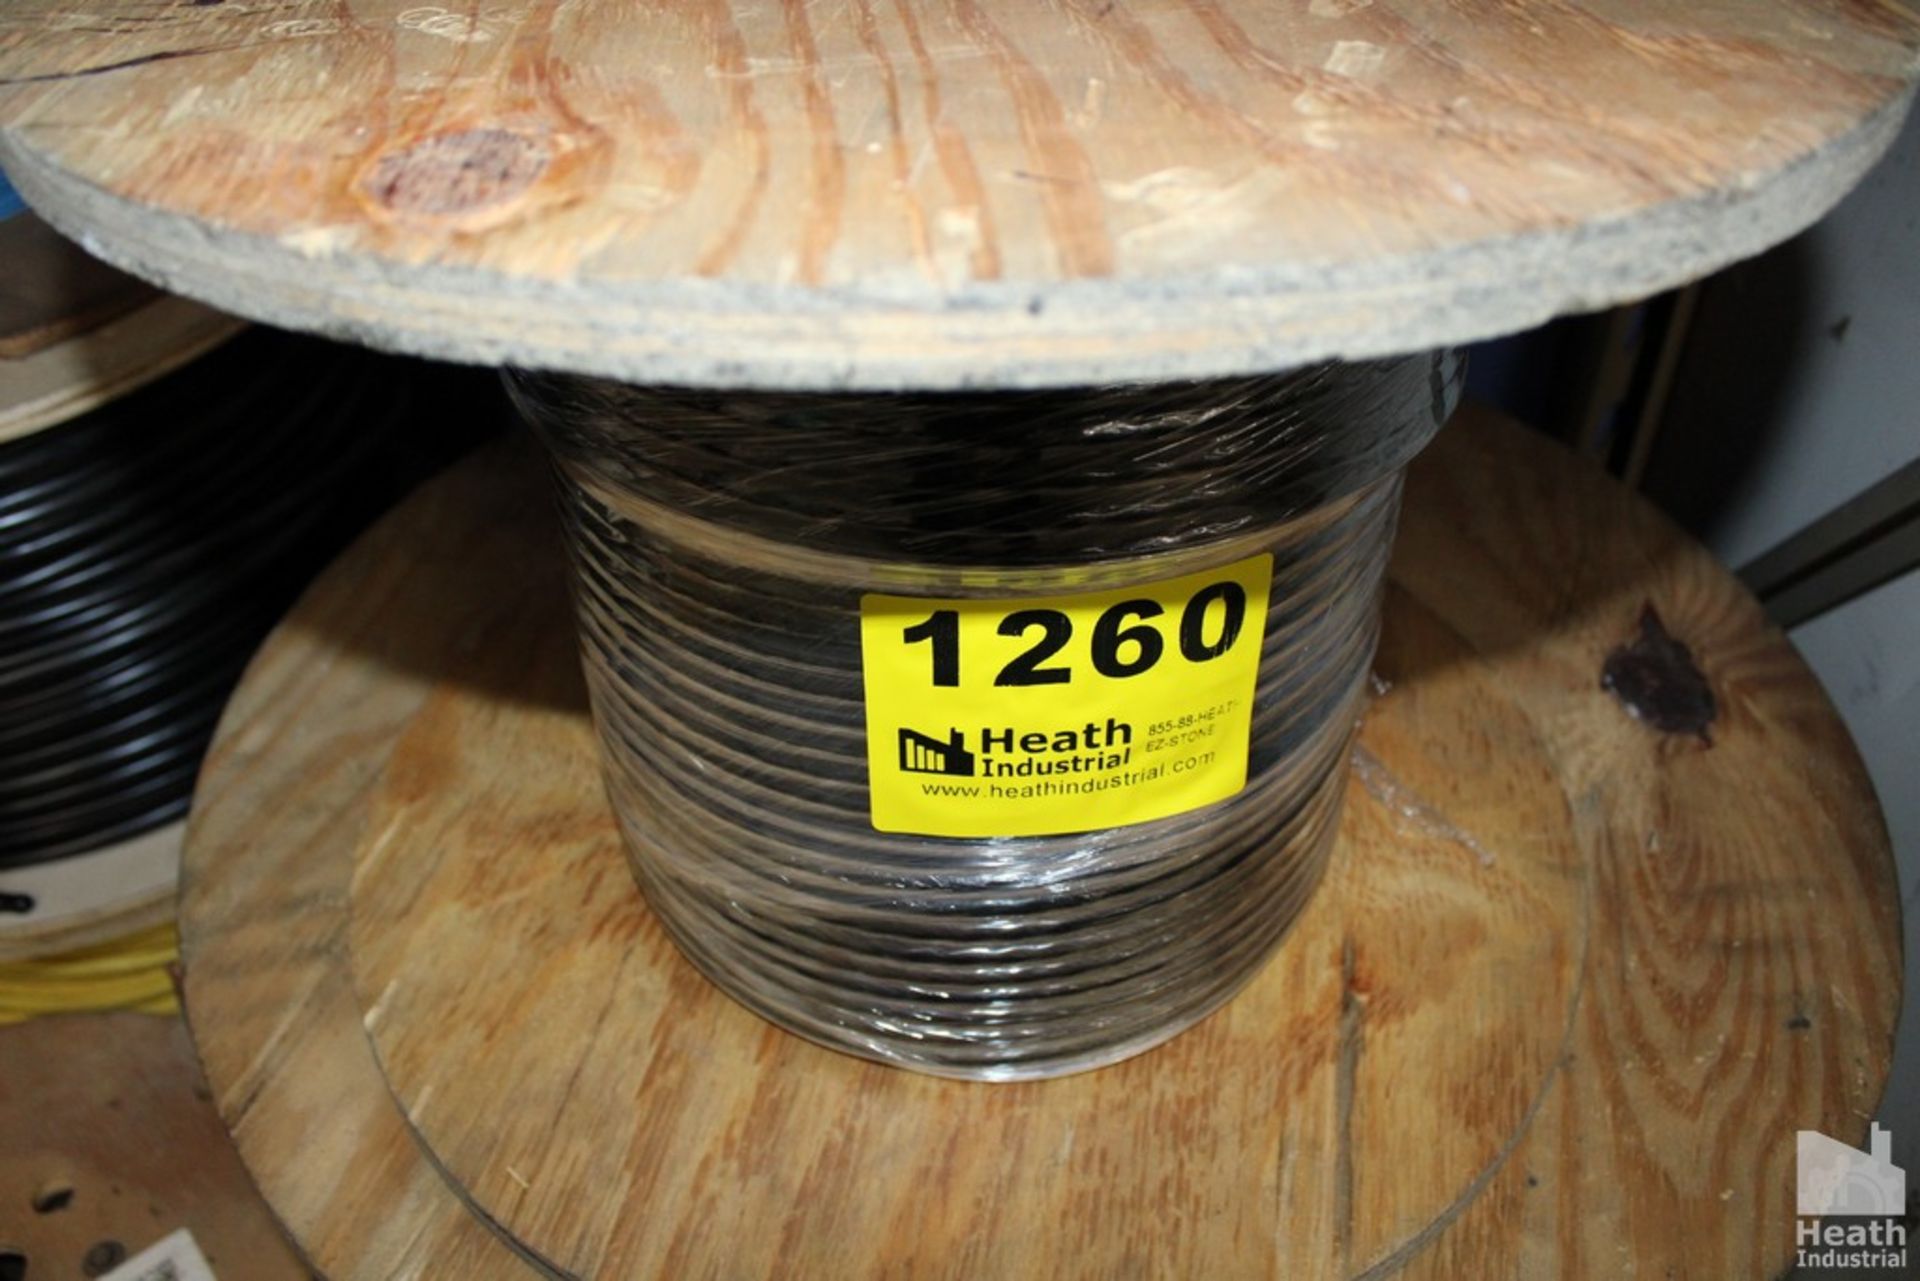 SPOOL OF THICK COPPER WIRE - Image 2 of 4